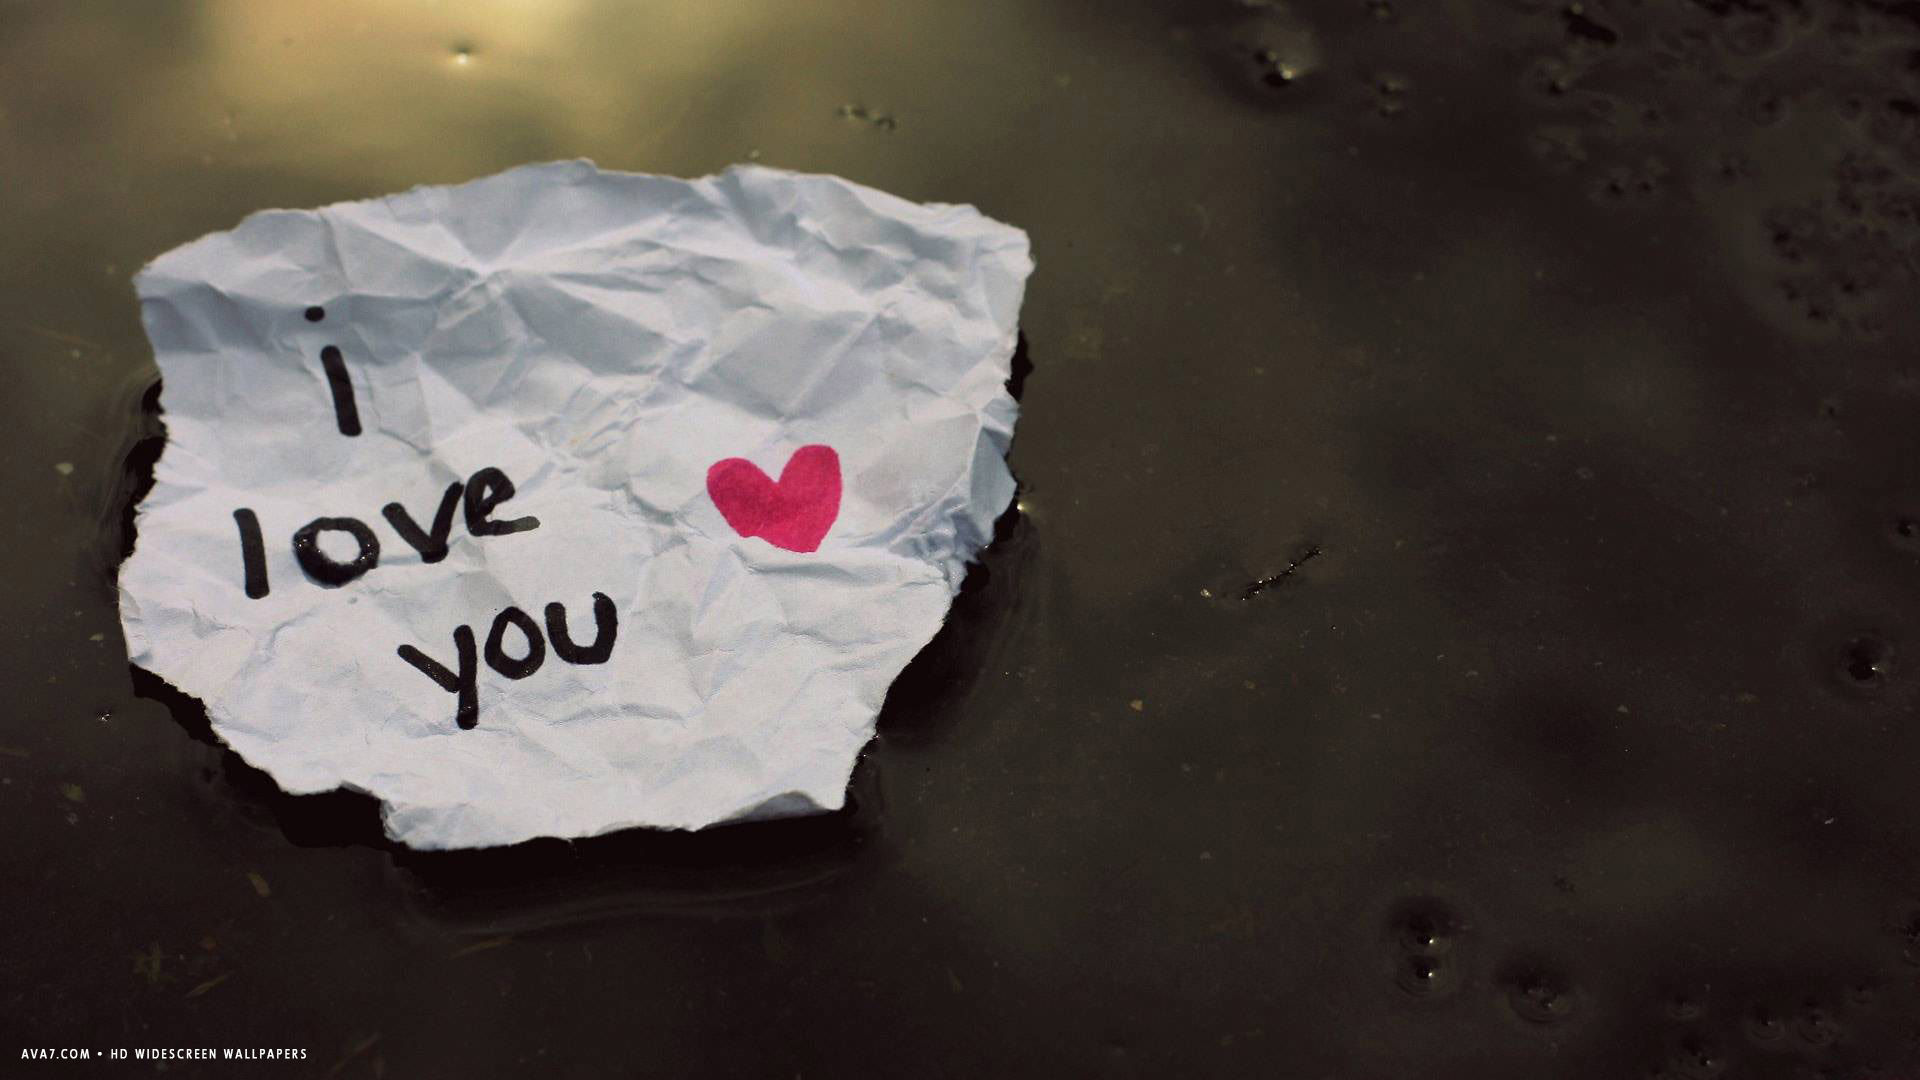 I Love You Paper Heart Words Hd Widescreen Wallpaper - Background I Love You  - 1920x1080 Wallpaper 